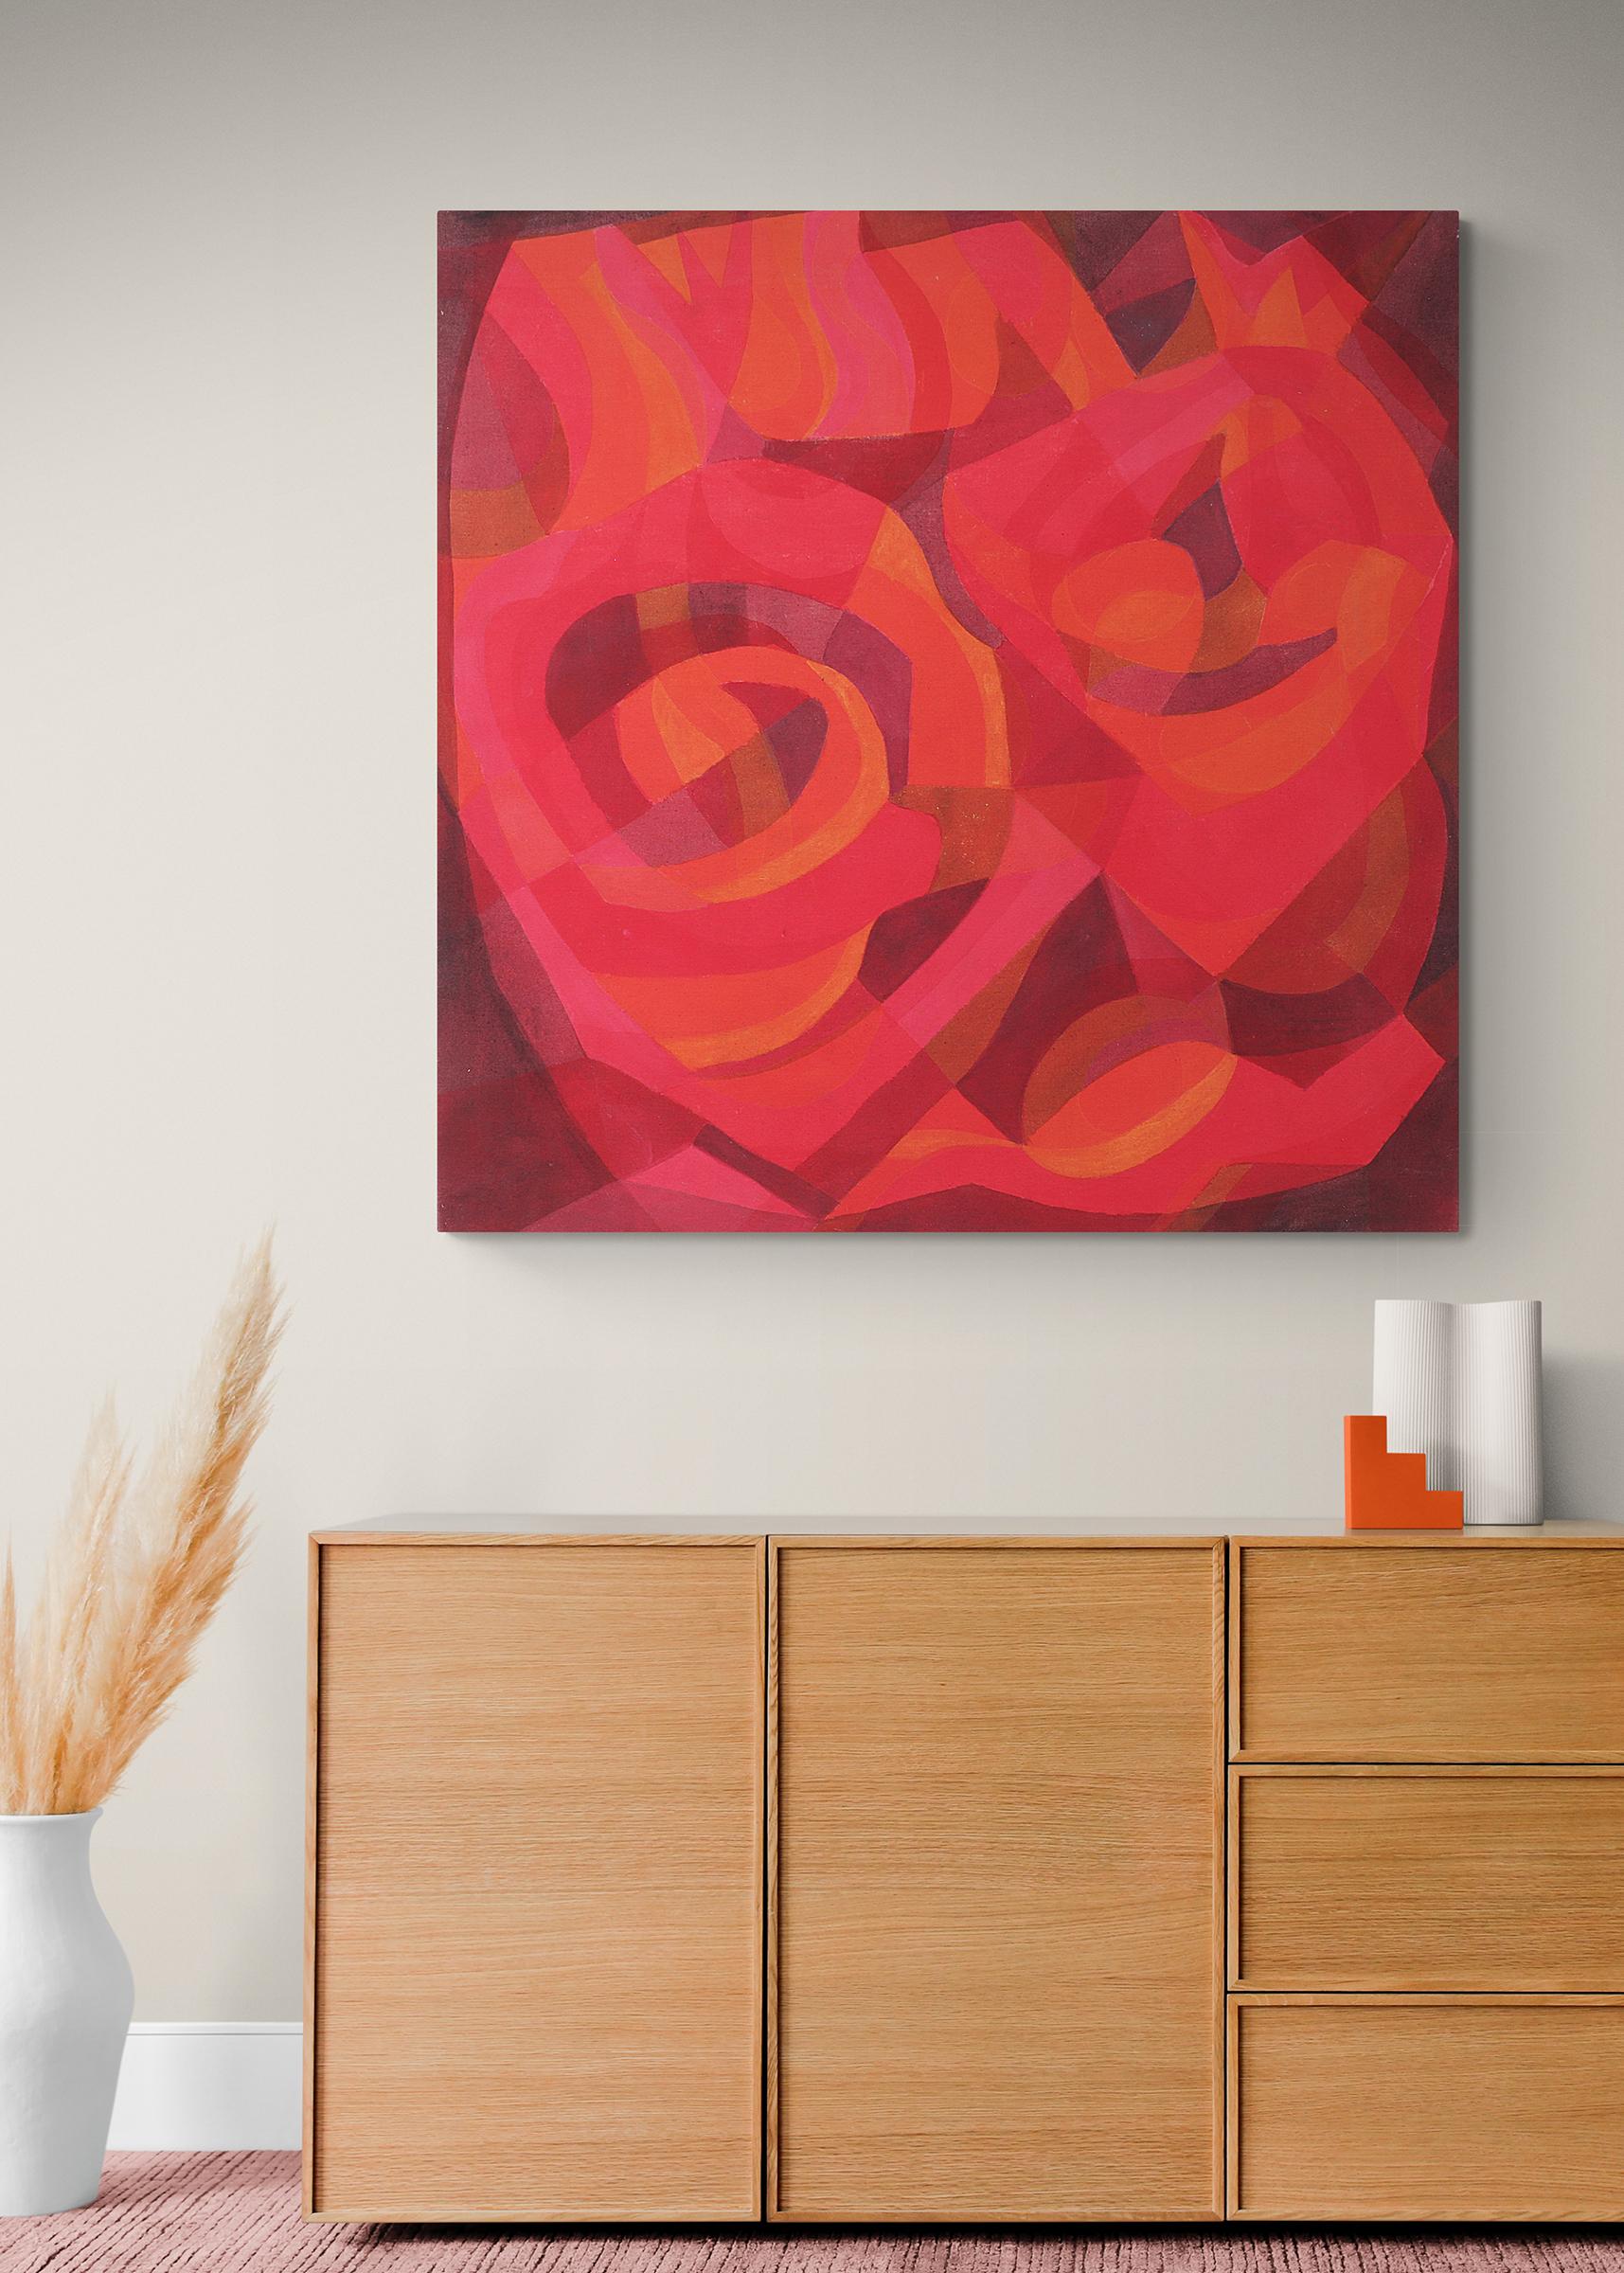 Revolving Sundown, 1980s Red and Orange Abstract Acrylic on Canvas Painting  5